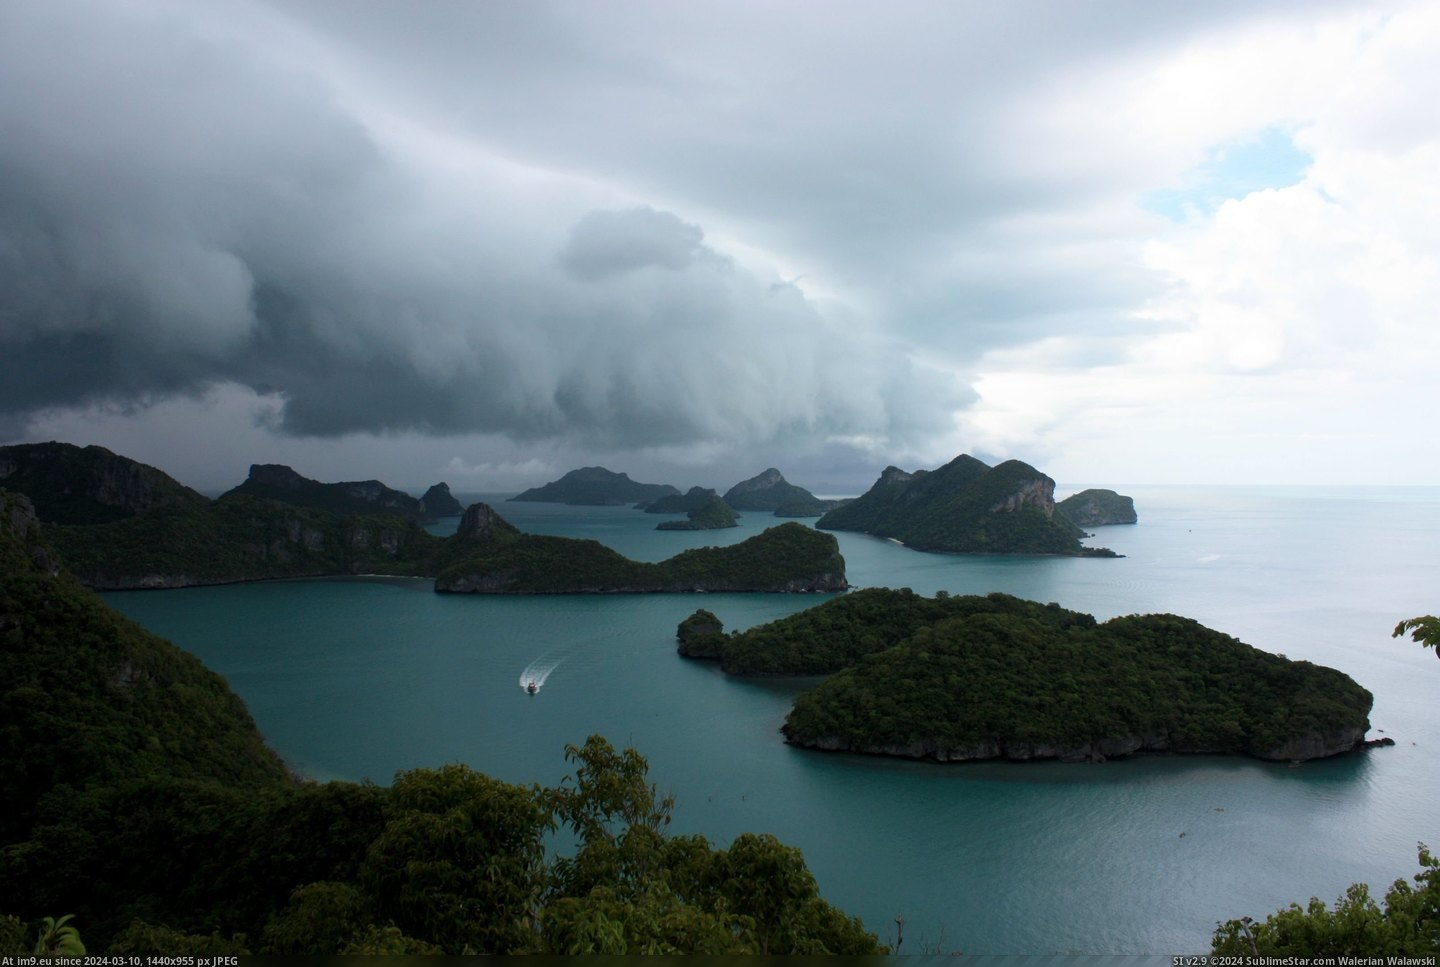 #Picture #National #Favourite #Rain #Incoming #Backpacked #Ang #Thong #Thailand #Marine #Waited [Earthporn] [OC] Backpacked in Thailand, waited for the incoming rain to take my favourite picture. Ang Thong Marine National Pa Pic. (Bild von album My r/EARTHPORN favs))